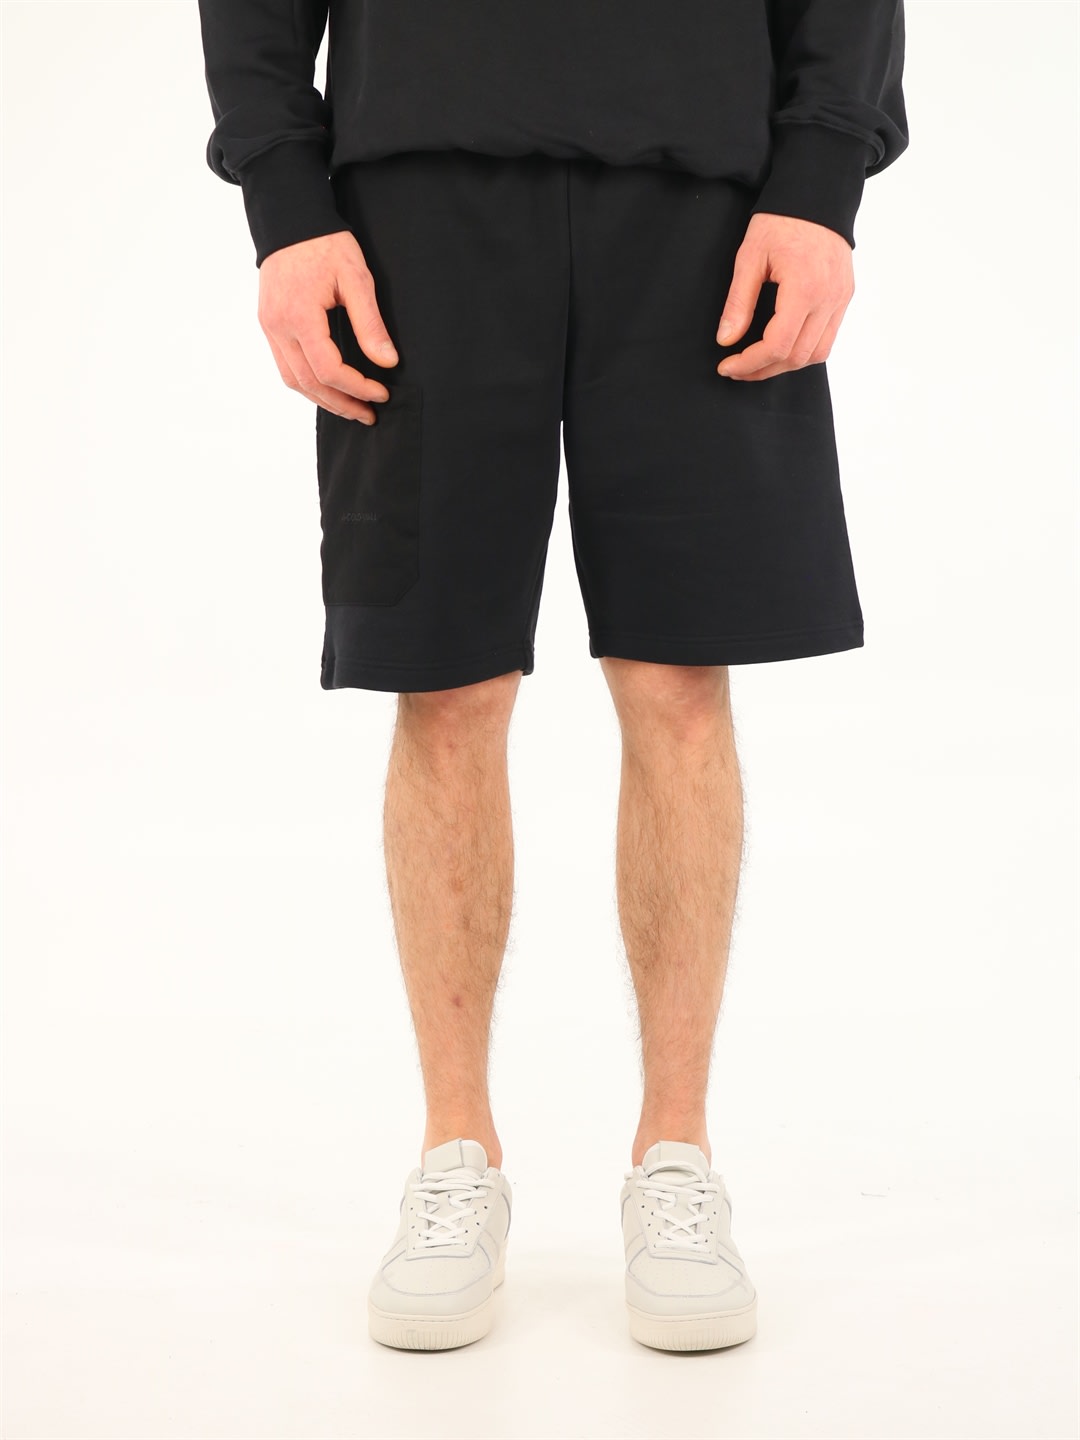 A-COLD-WALL Heightfield Shorts